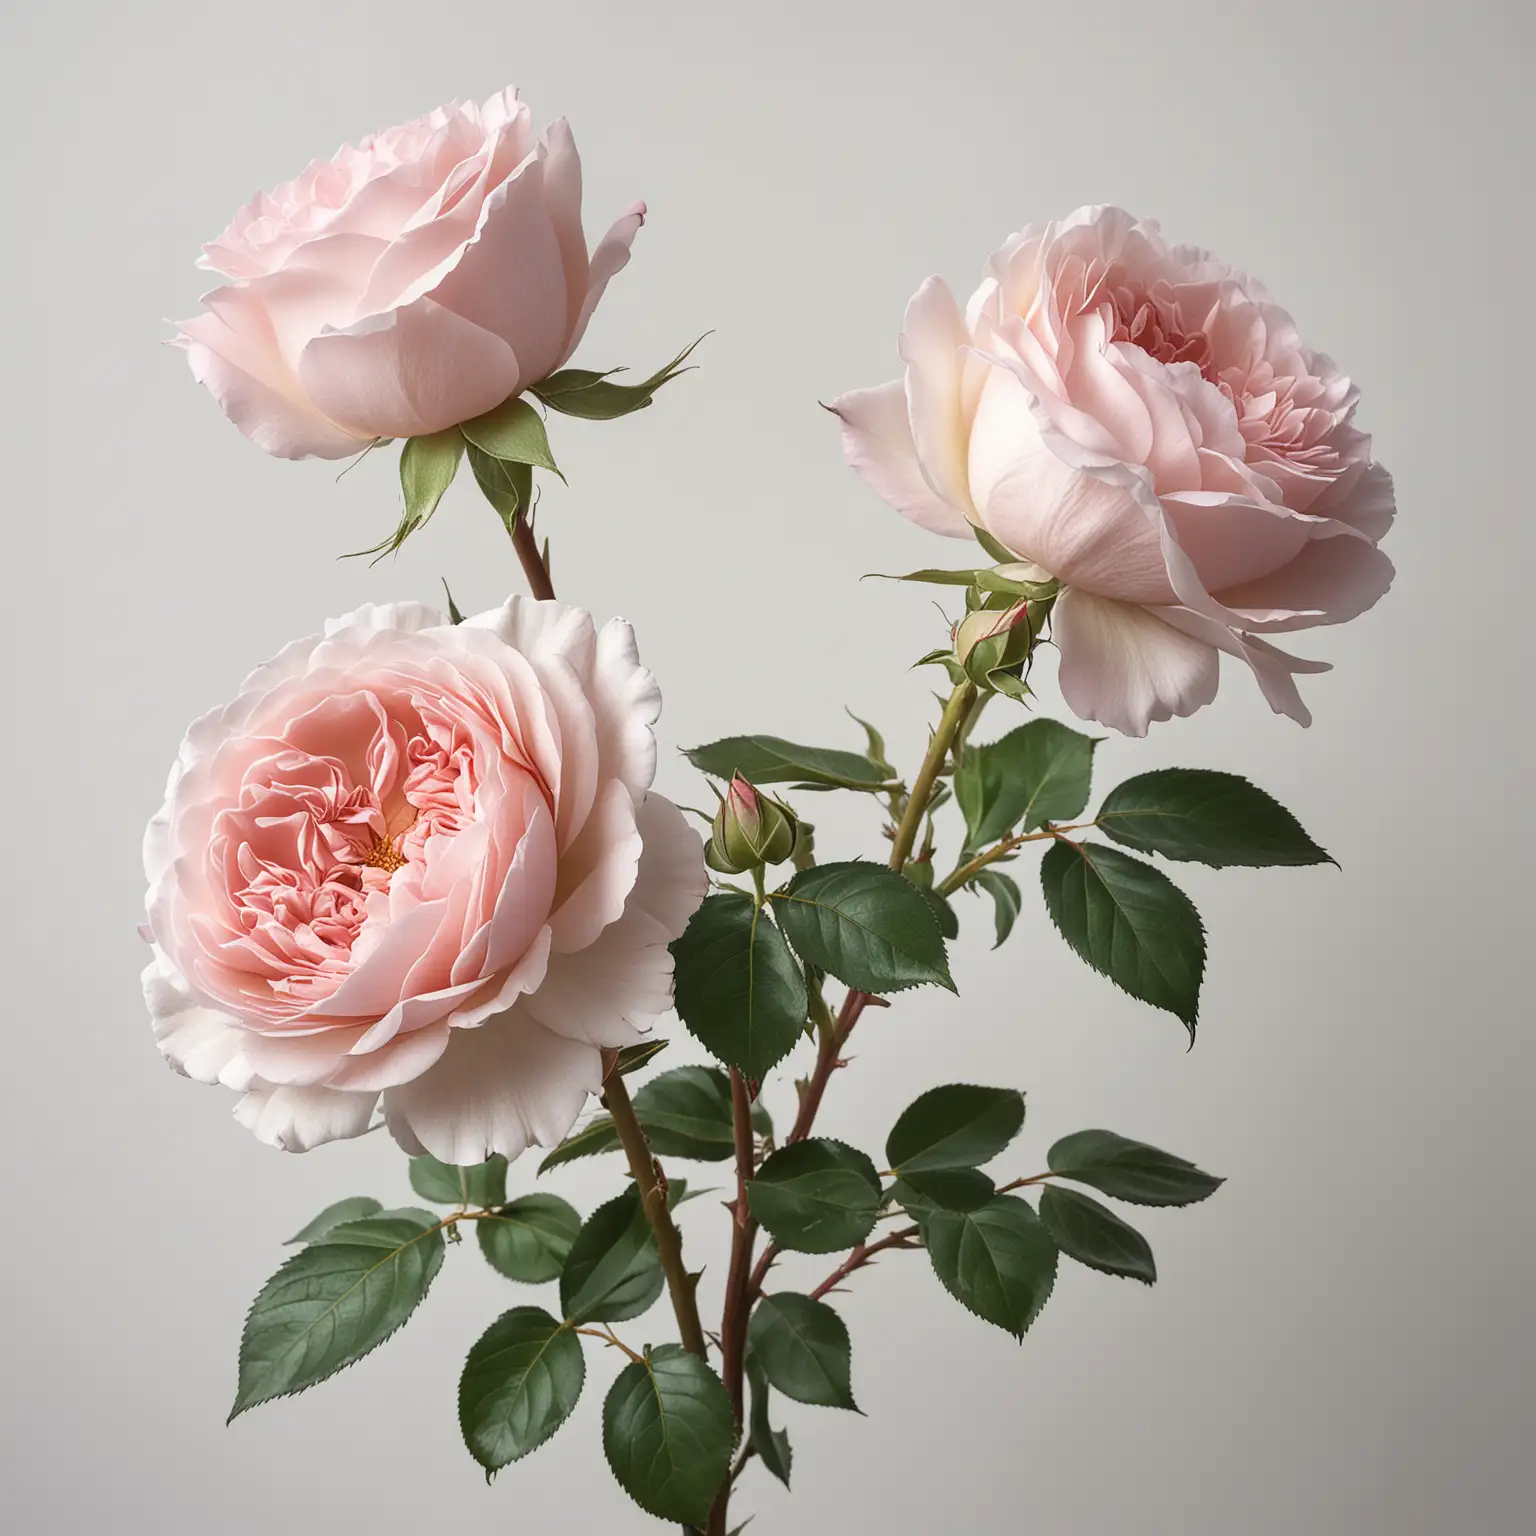 Very realistic, a trio of david Austin roses, appearing from out the left corner of the image, pale creamy dusty pink, moody, open petals, no foliage visible, on a solid white background